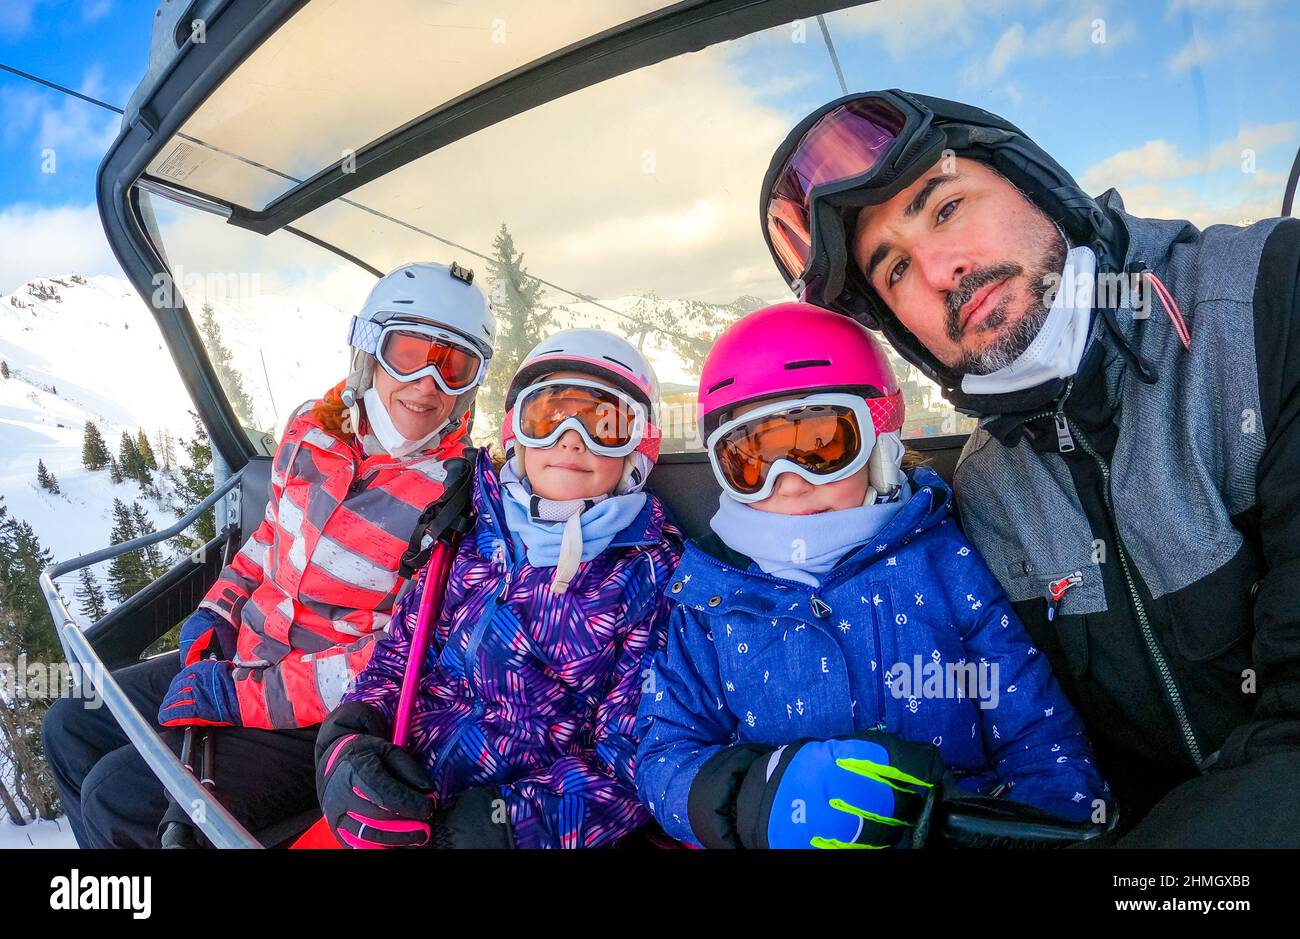 Cute Girl Skier Skiing With Family On Mountain Stock Photo